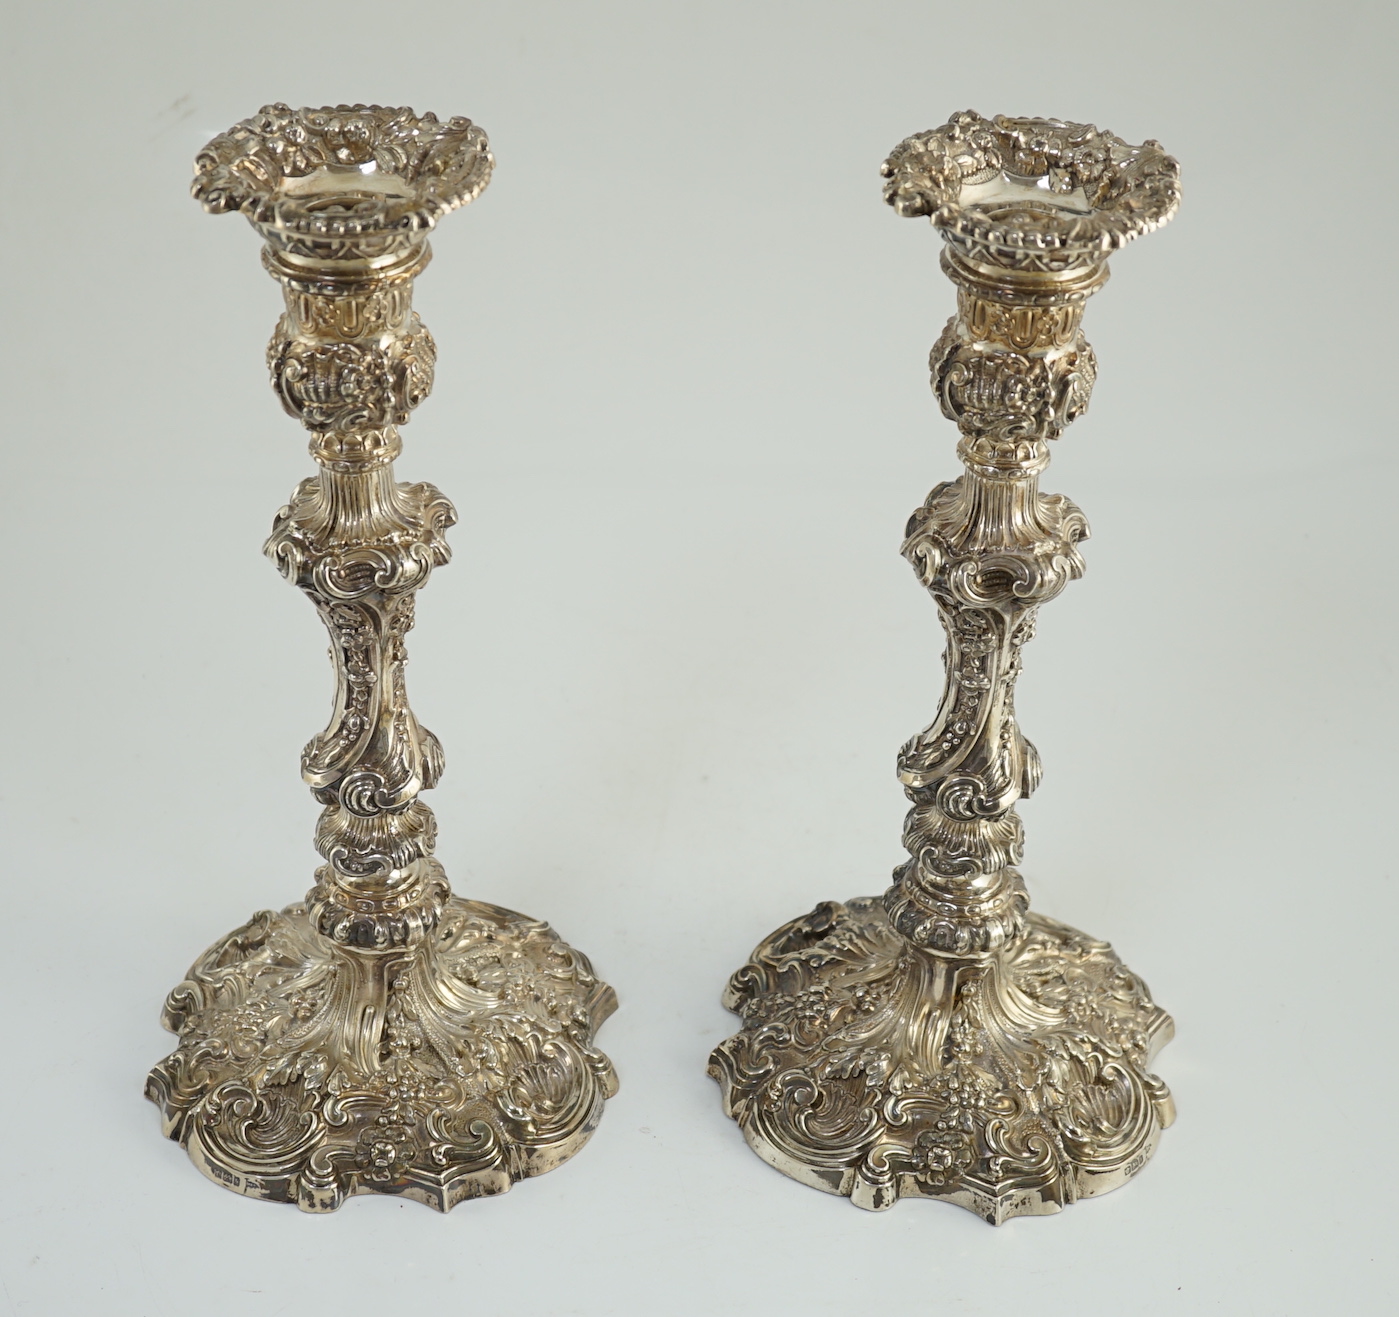 An ornate pair of Edwardian silver candlesticks, by Walker & Hall, with fixed sconces, waisted - Image 4 of 11